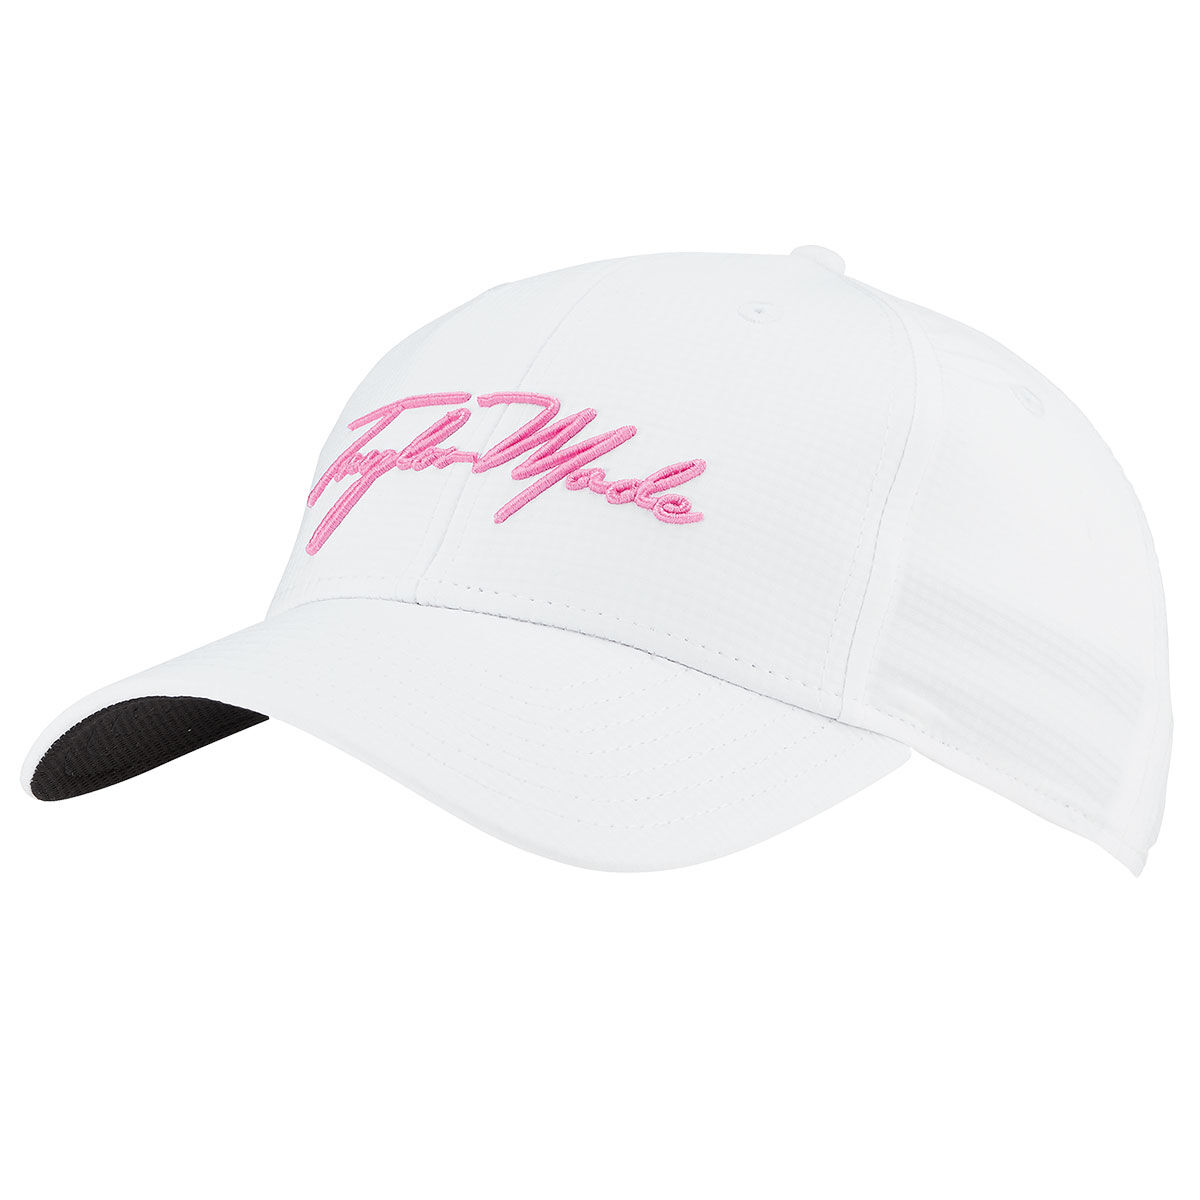 TaylorMade Women's White and Pink Comfortable Embroidered Script Golf Cap | American Golf, One Size von TaylorMade